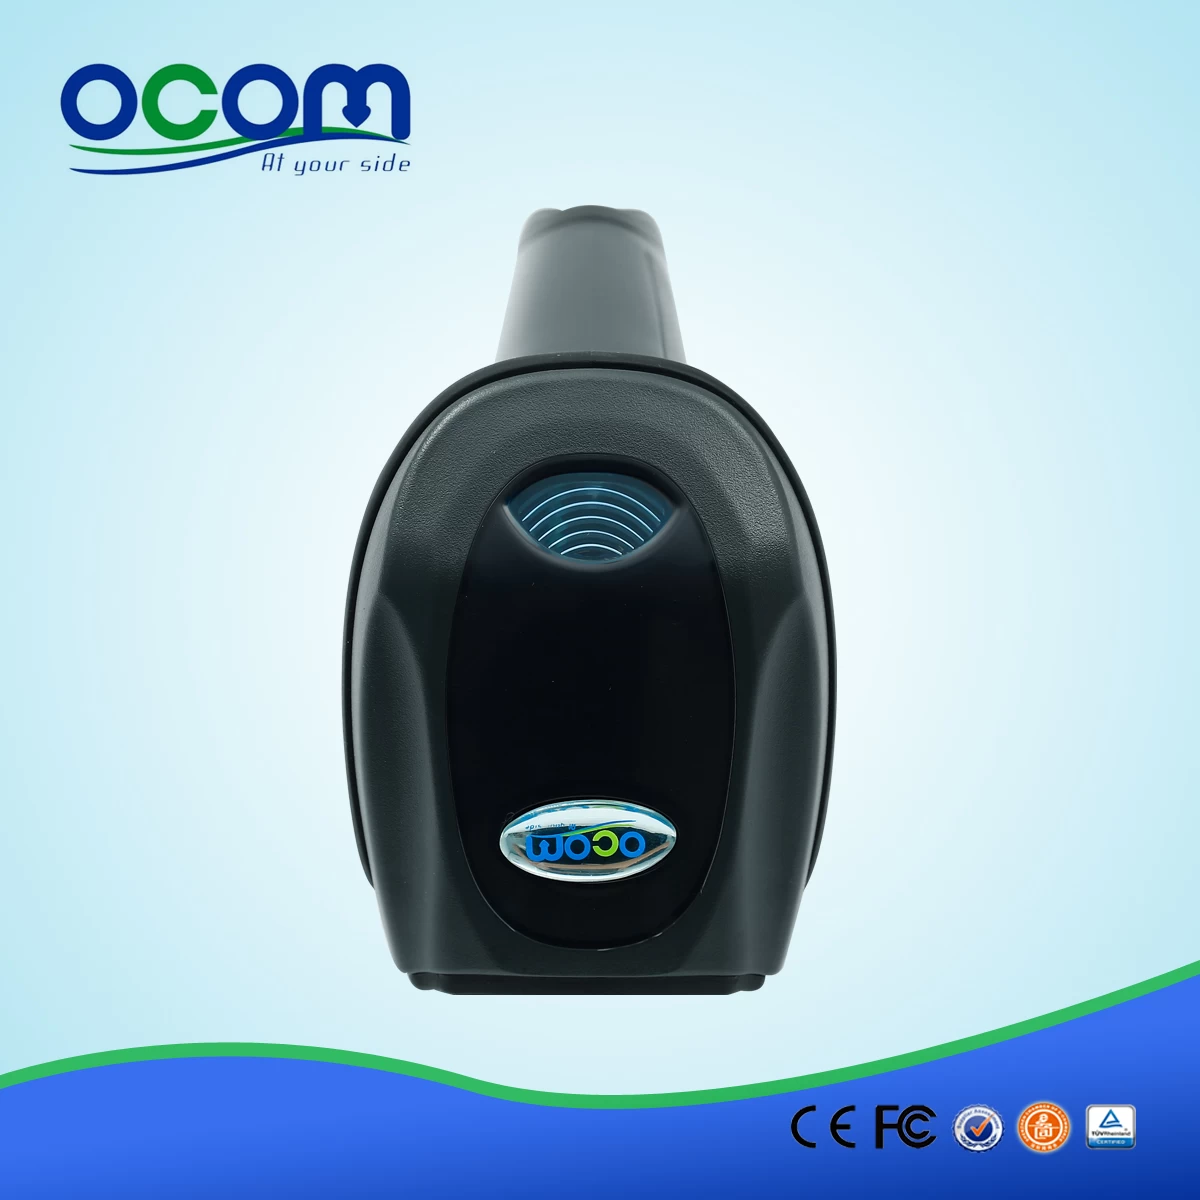 OCBS-W800 433MHz wireless portable barcode scanner with memory